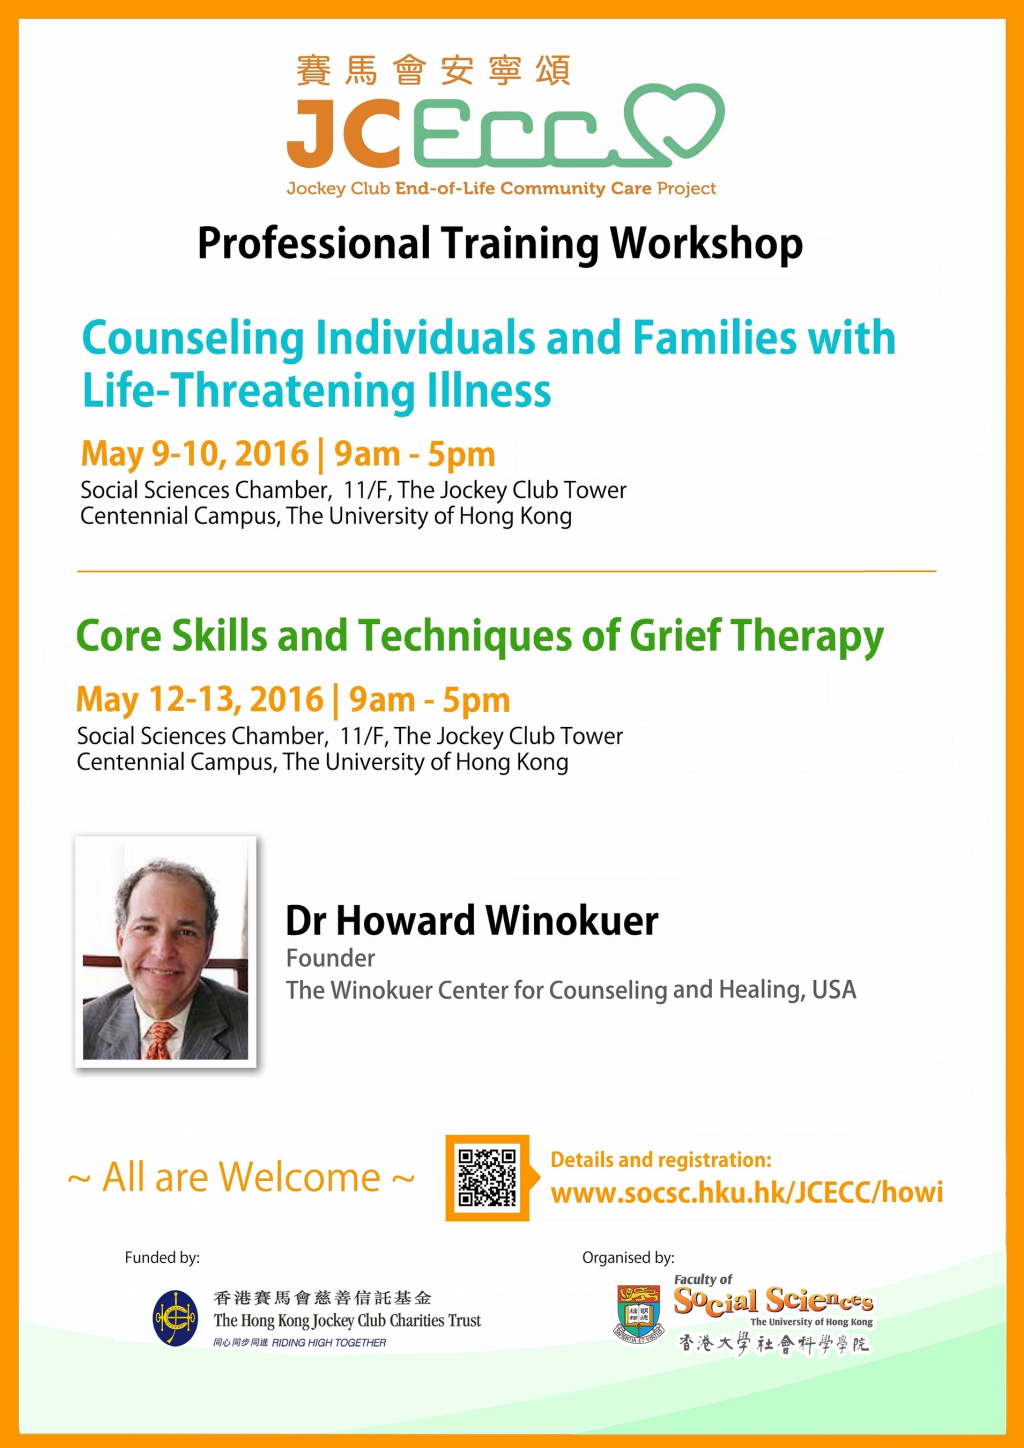 Workshop on Counseling Individuals and Families with Life-Threatening Illness / Core Skills and Techniques of Grief Therapy